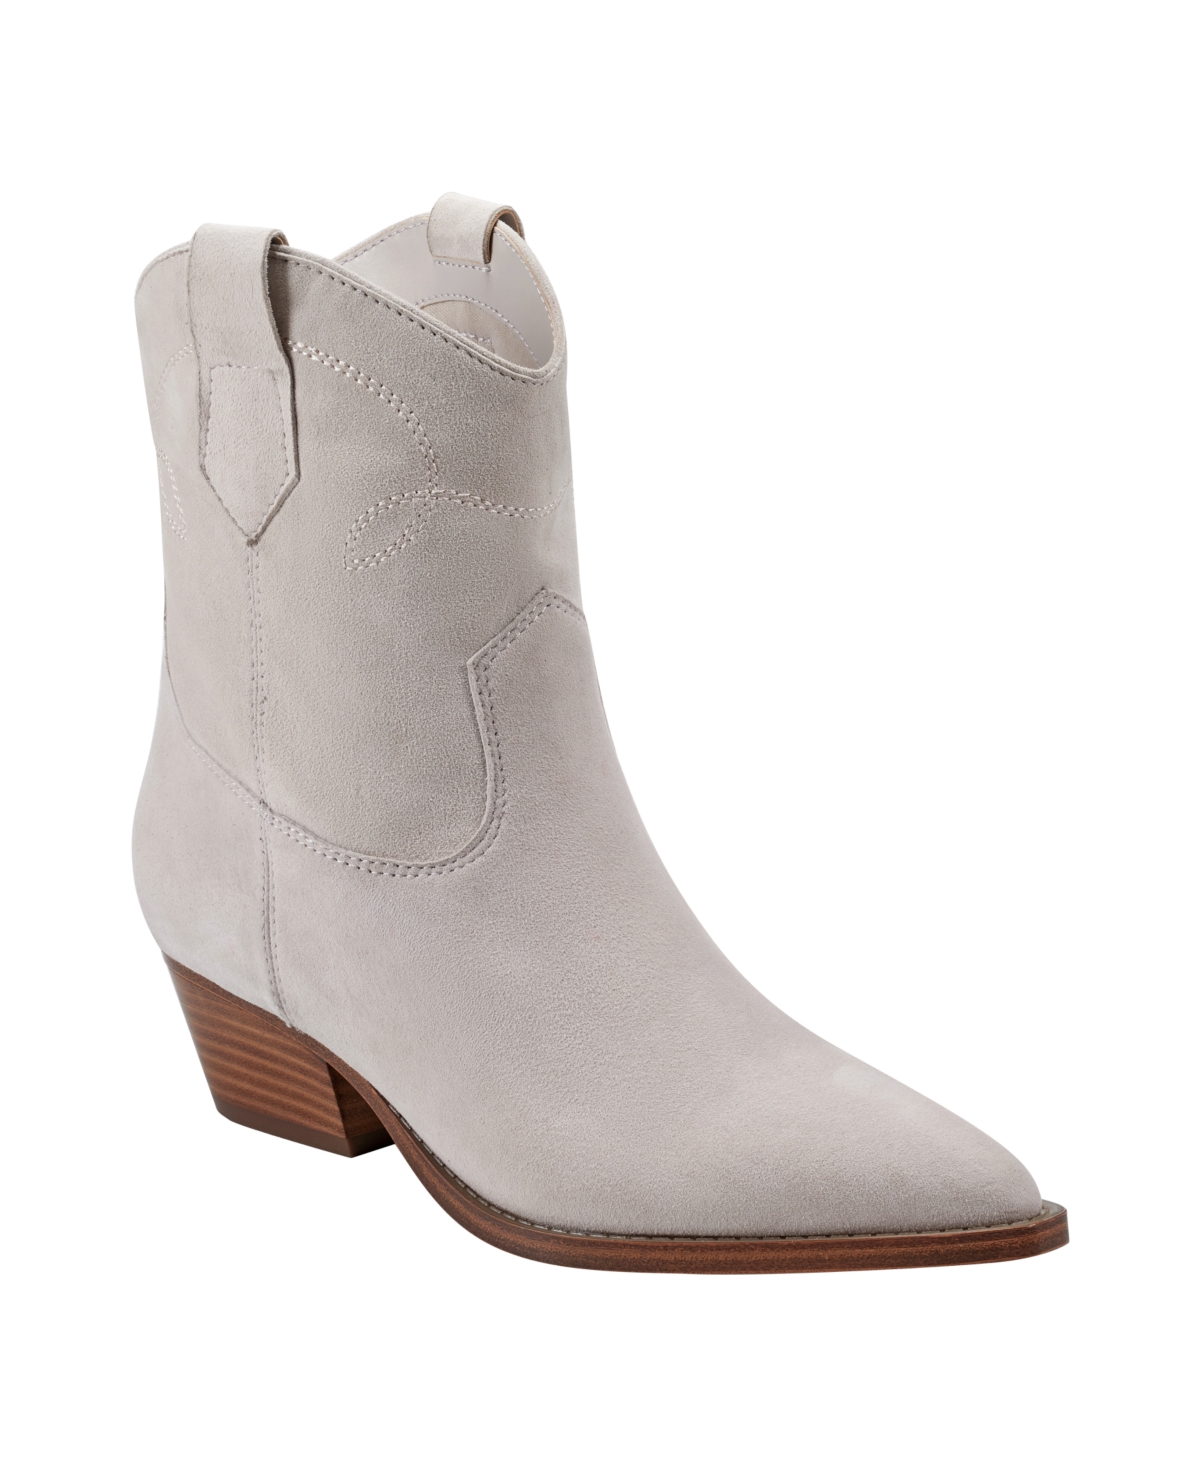 Women's Nonie Western Pointy Toe Dress Booties - White Leather